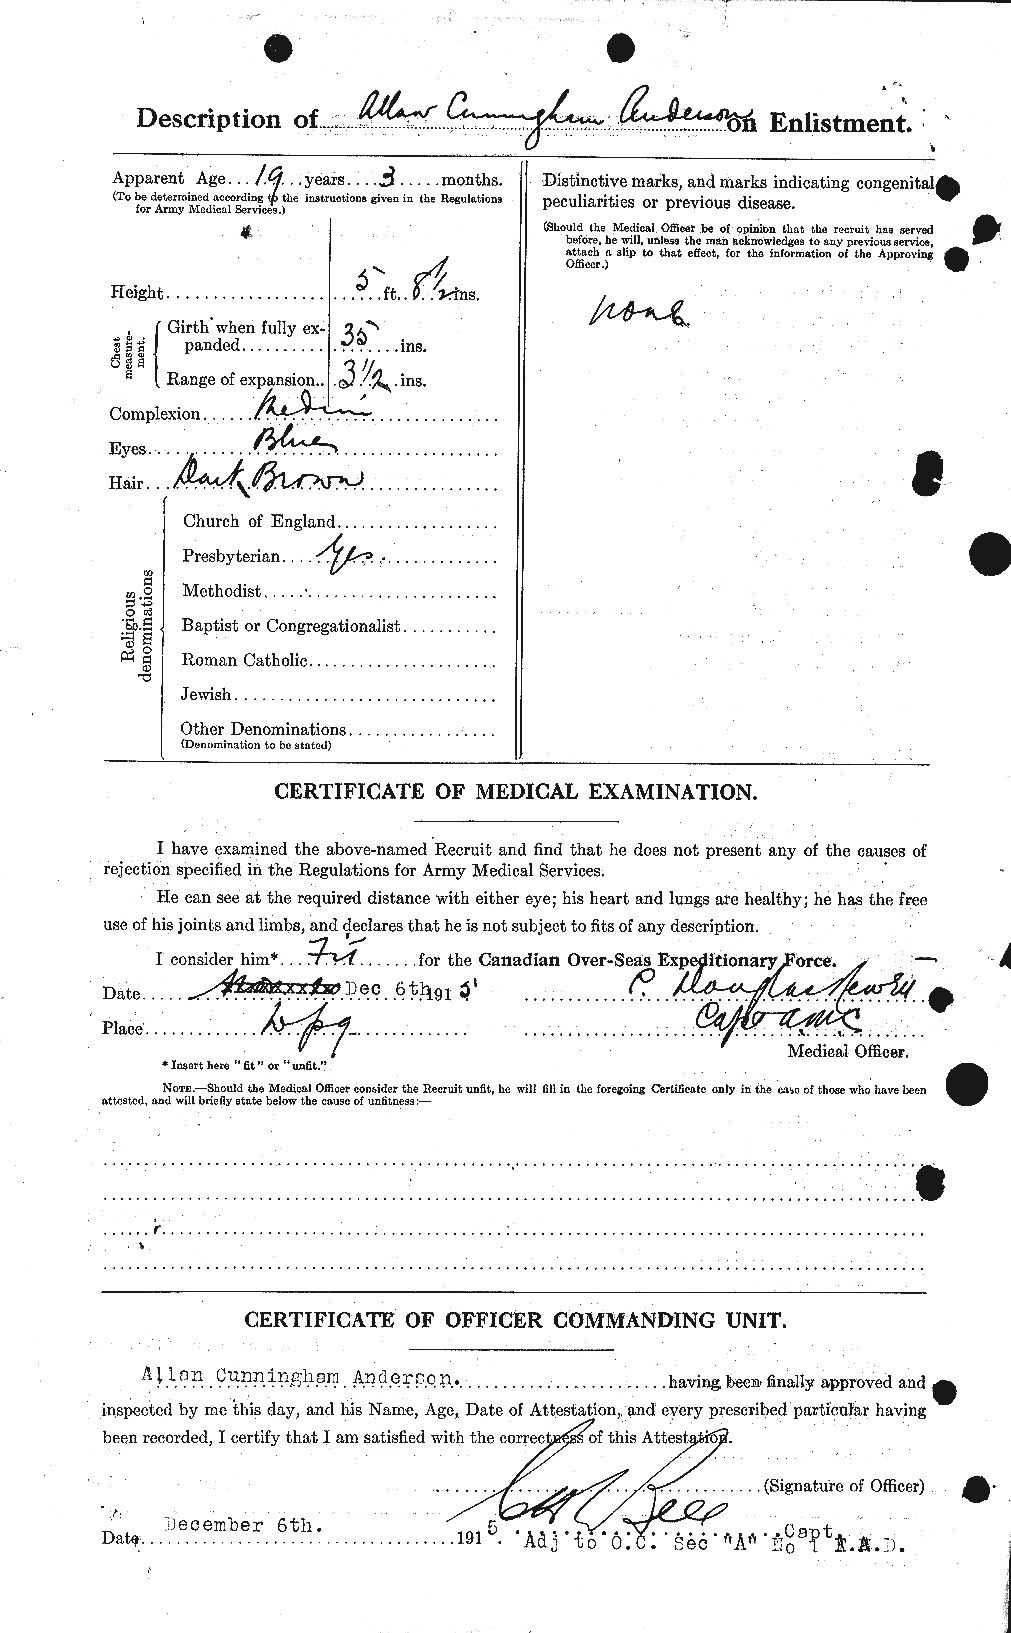 Personnel Records of the First World War - CEF 209444b